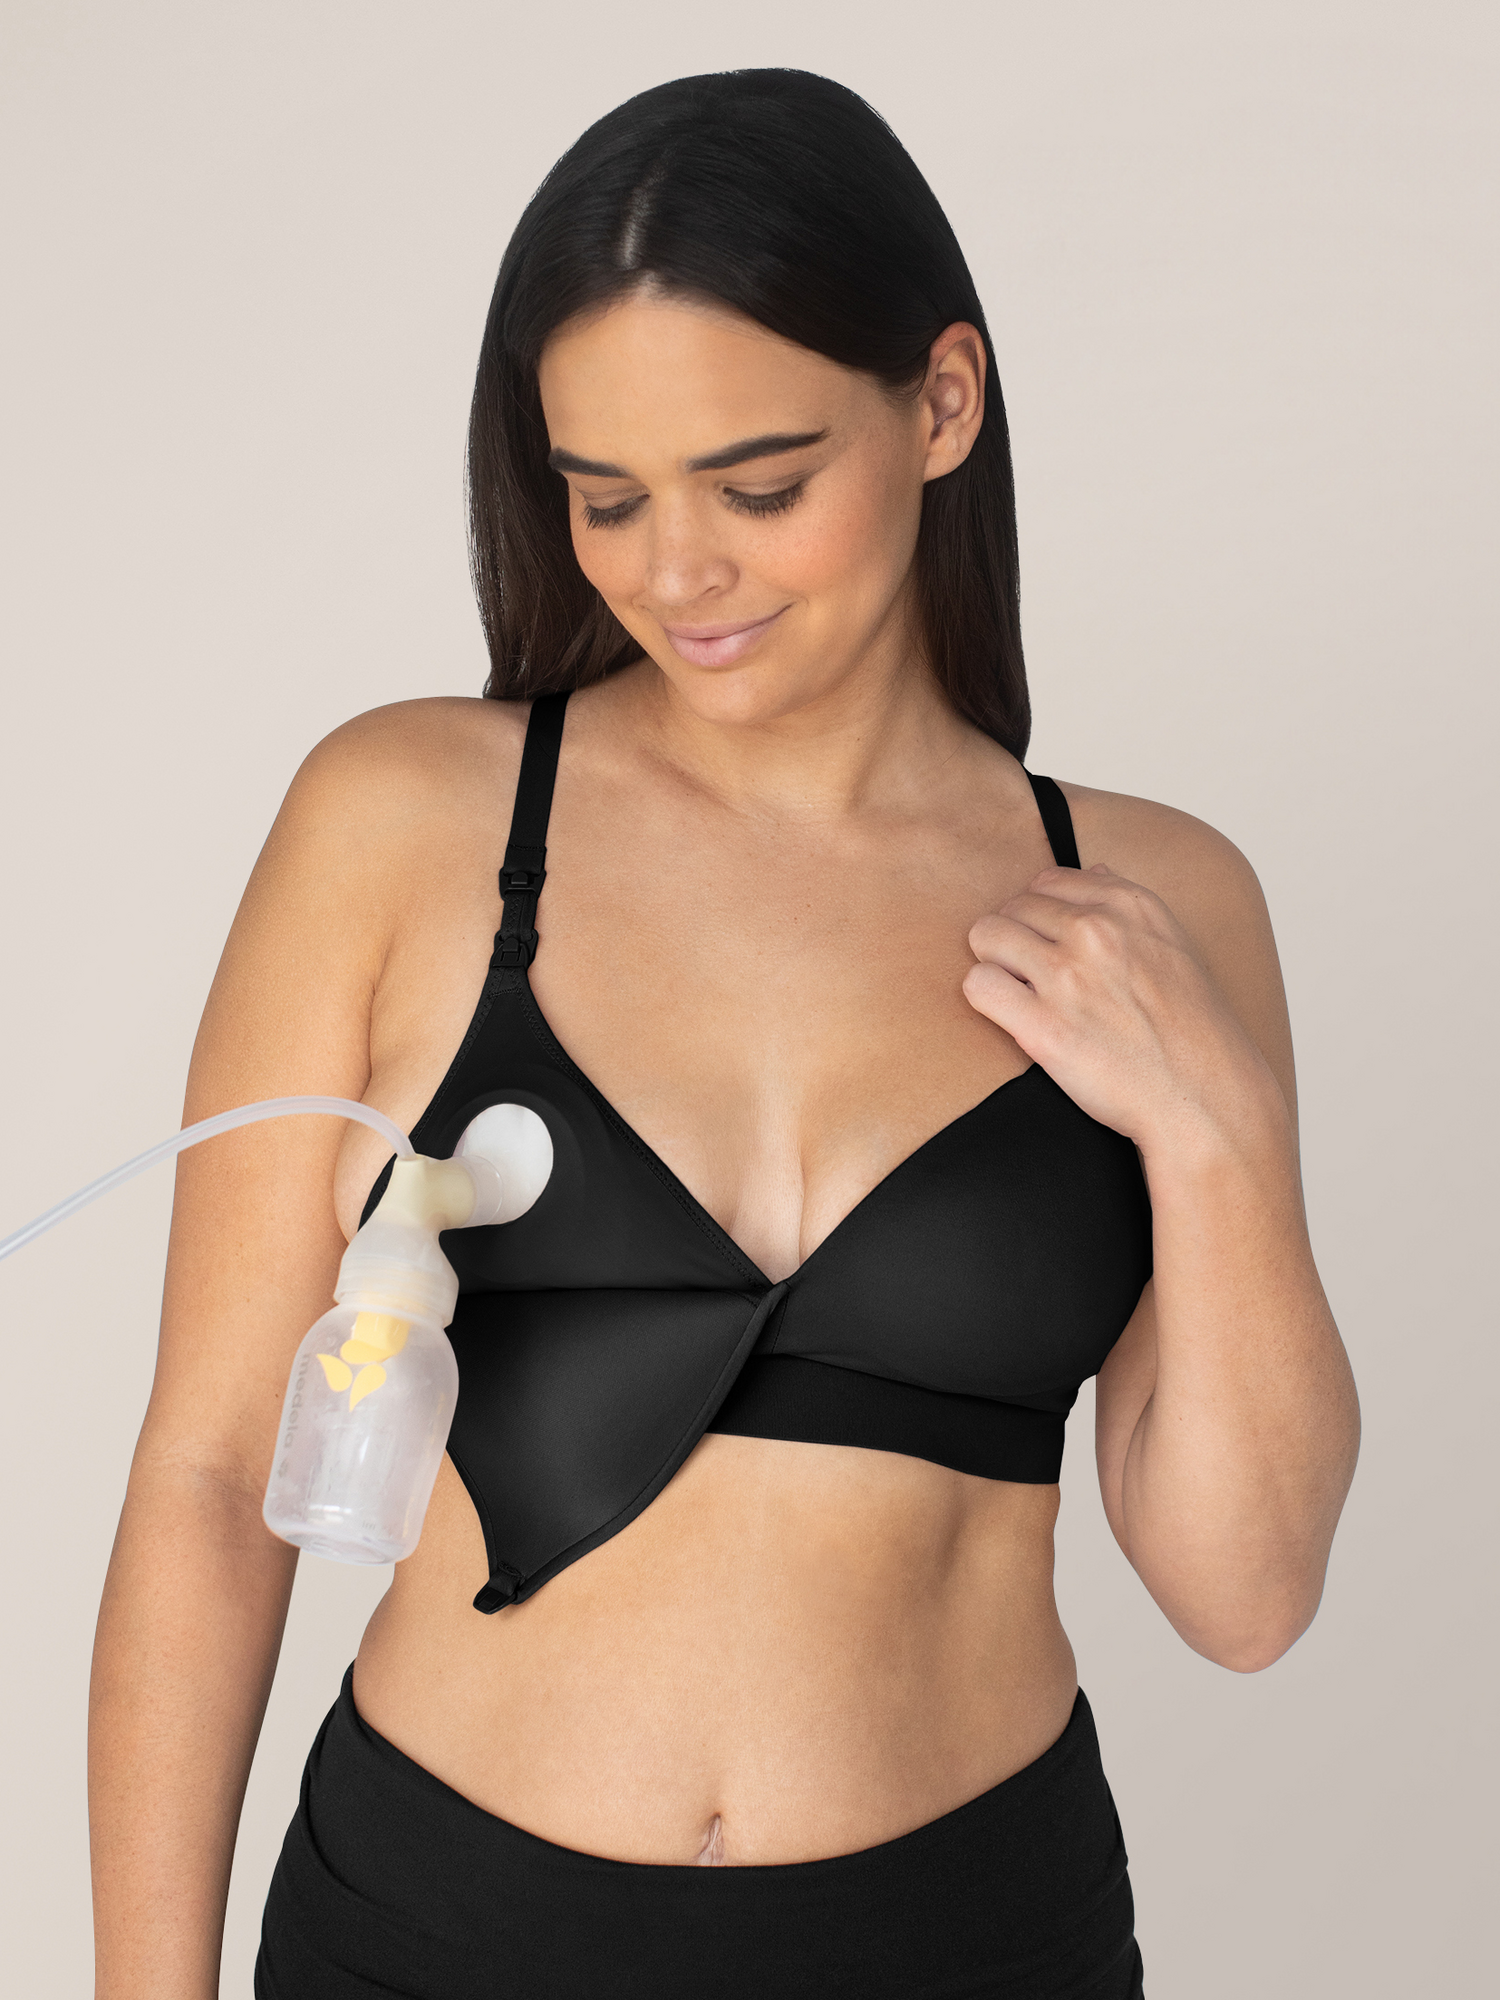 Model wearing the Minimalist Hands-Free Pumping & Nursing Bra in Black connected to a Pump.